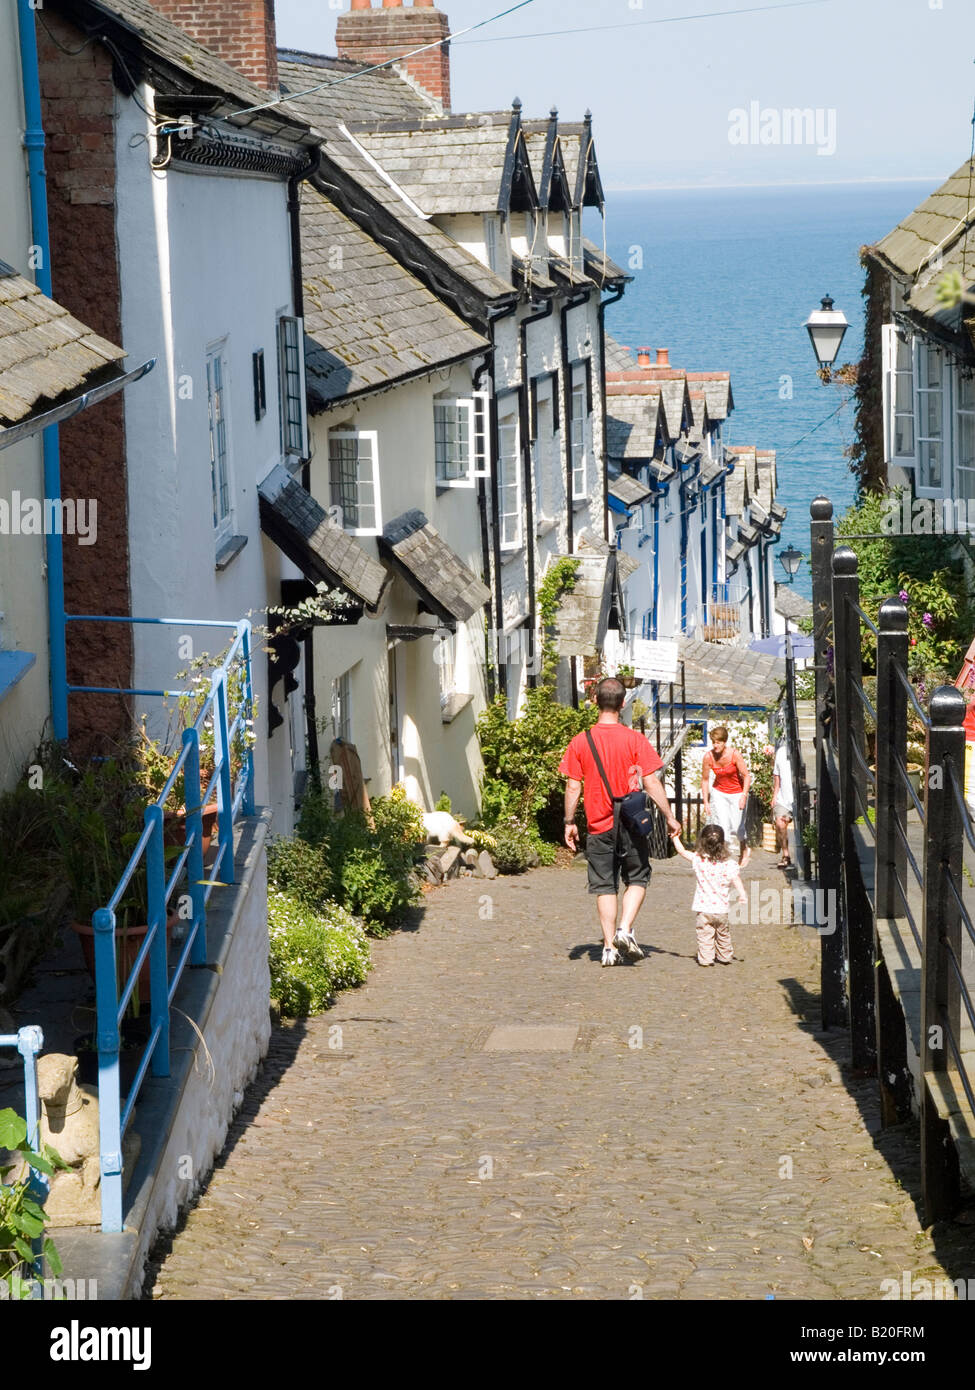 The cobbled street leading down to the harbour area, in the historic fishing village of Clovelly, North Devon England UK Stock Photo